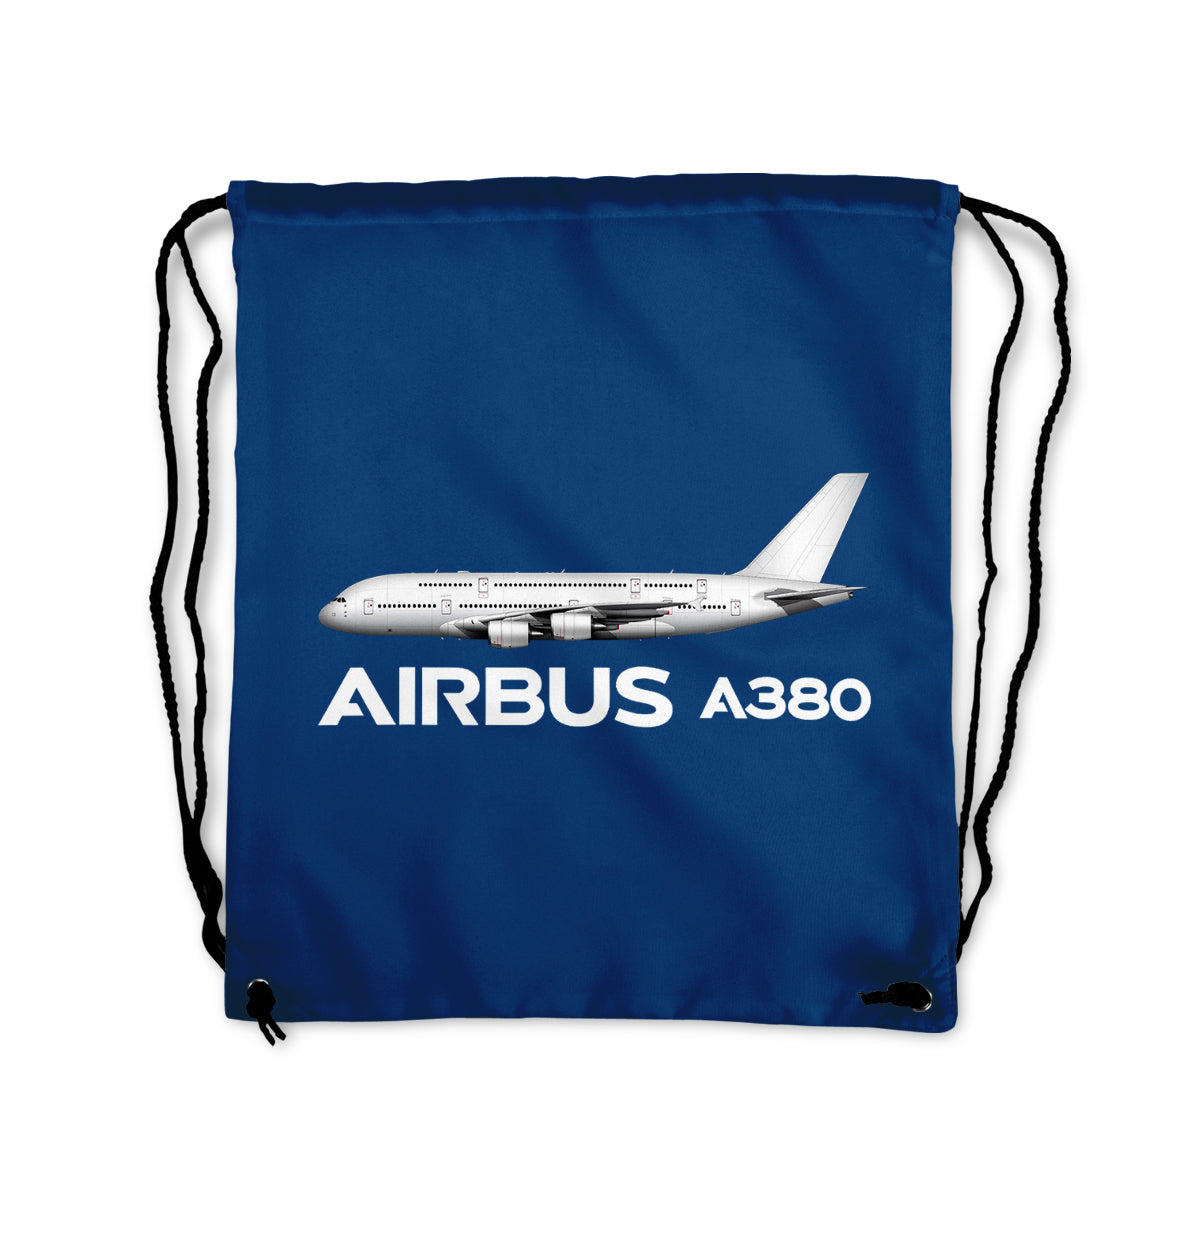 The Airbus A380 Designed Drawstring Bags